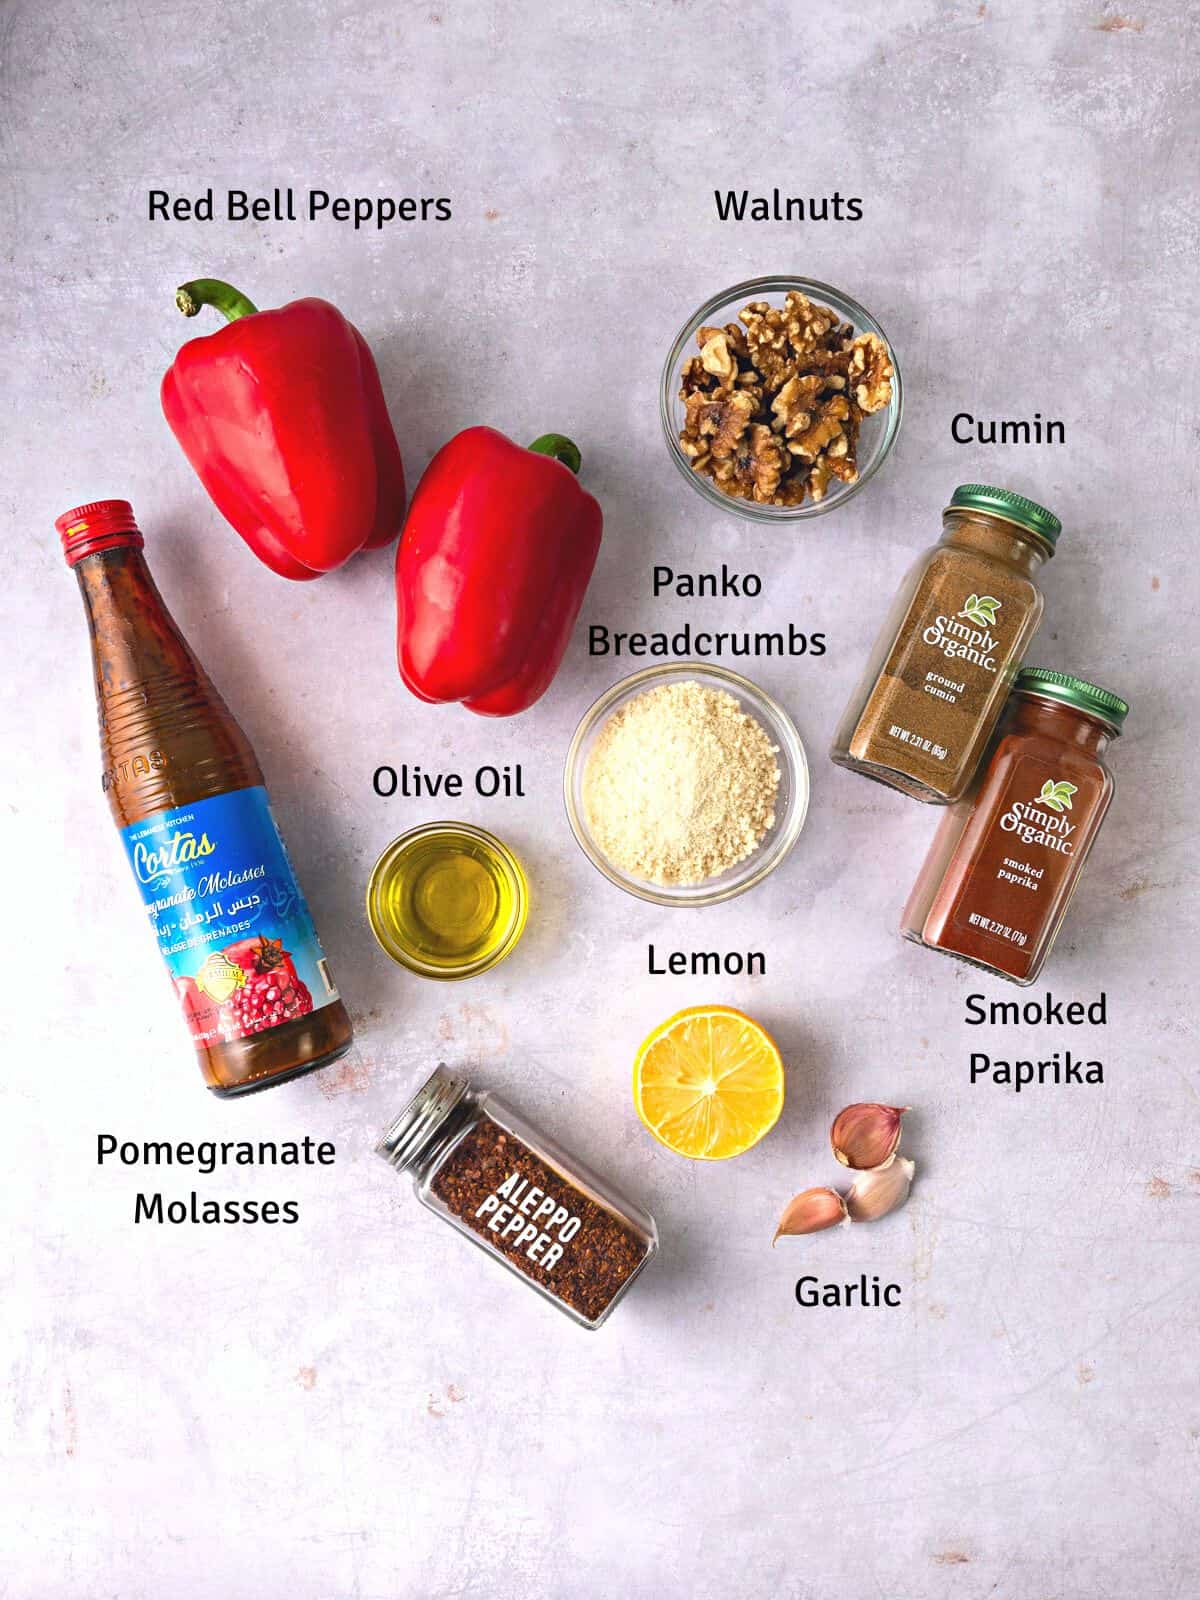 Ingredients for Turkish red pepper dip called muhammara with pomegranate molasses, cumin, paprika and garlic.